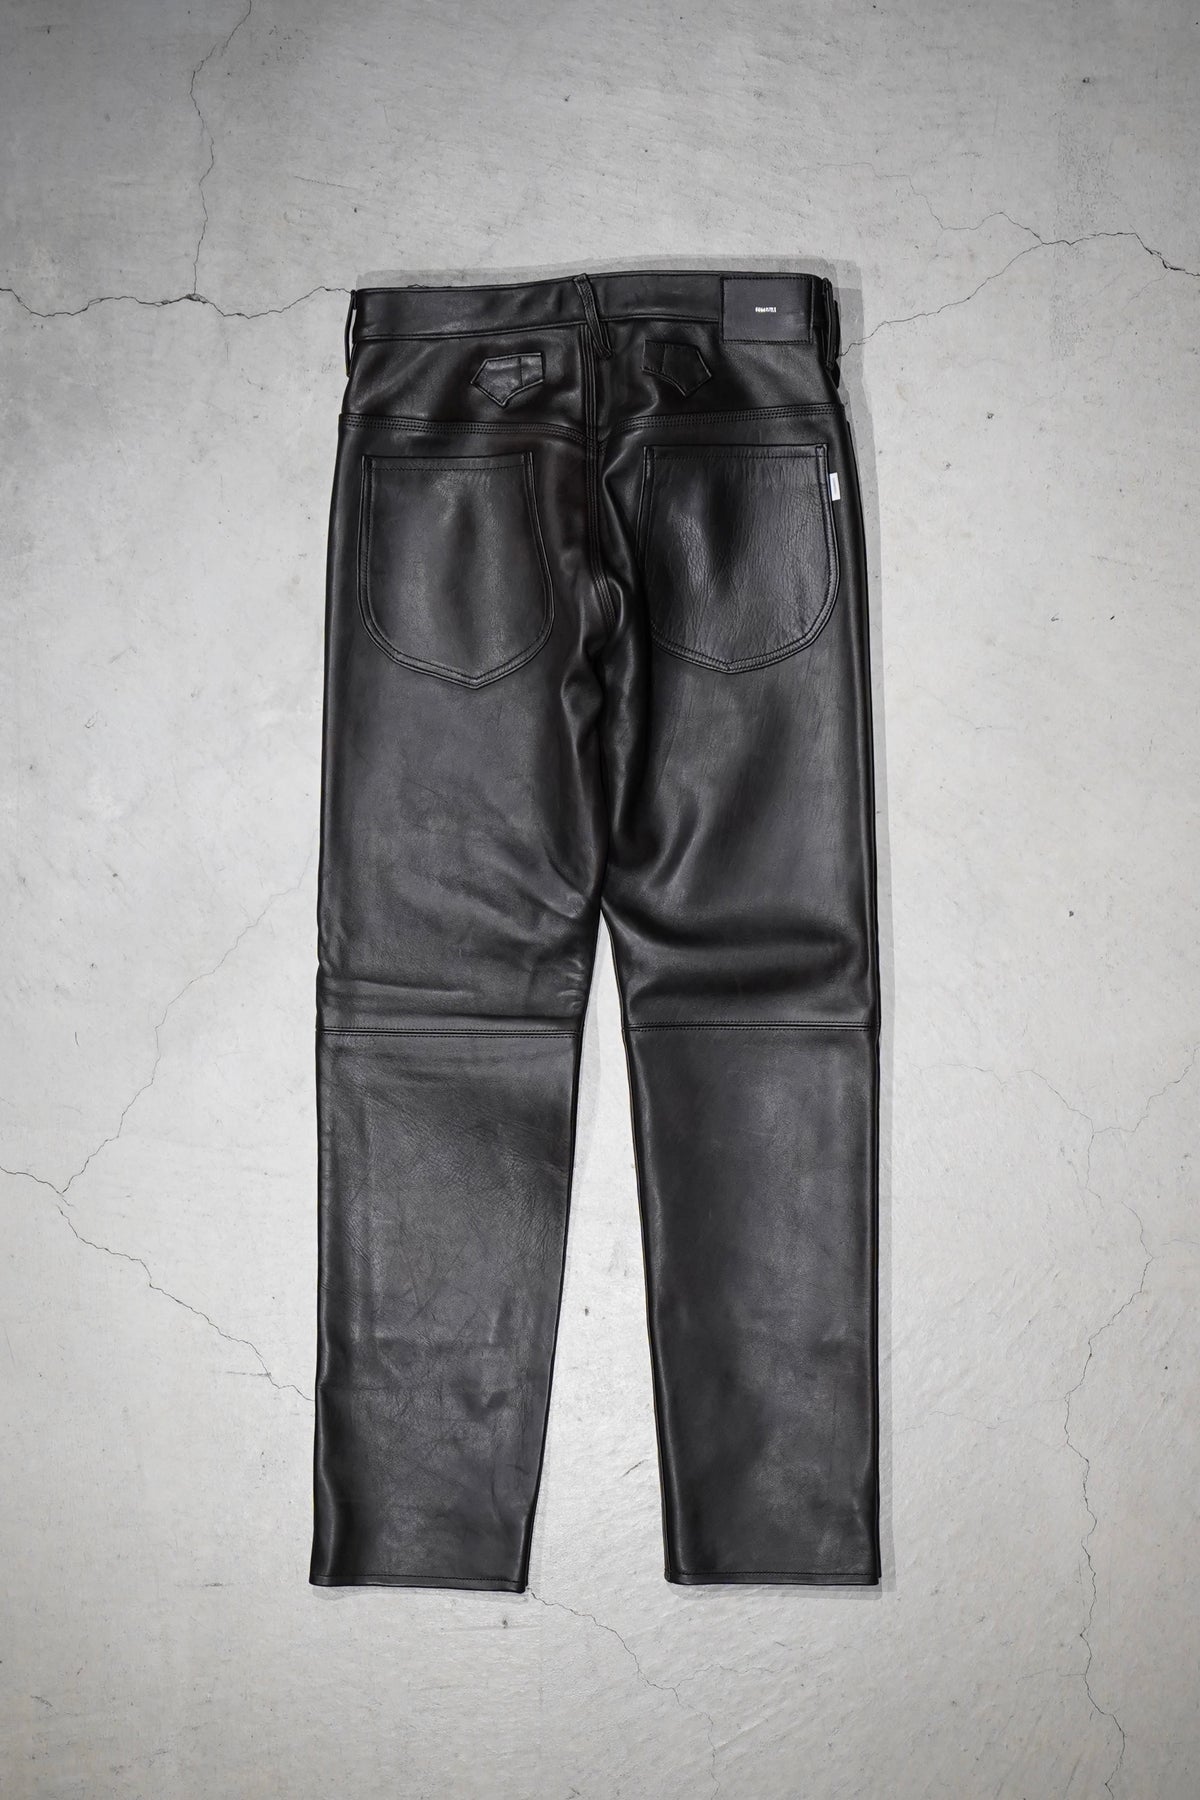 Sugarhill's Oil Horse Double Knee Pants (Pants) Mail Order ...